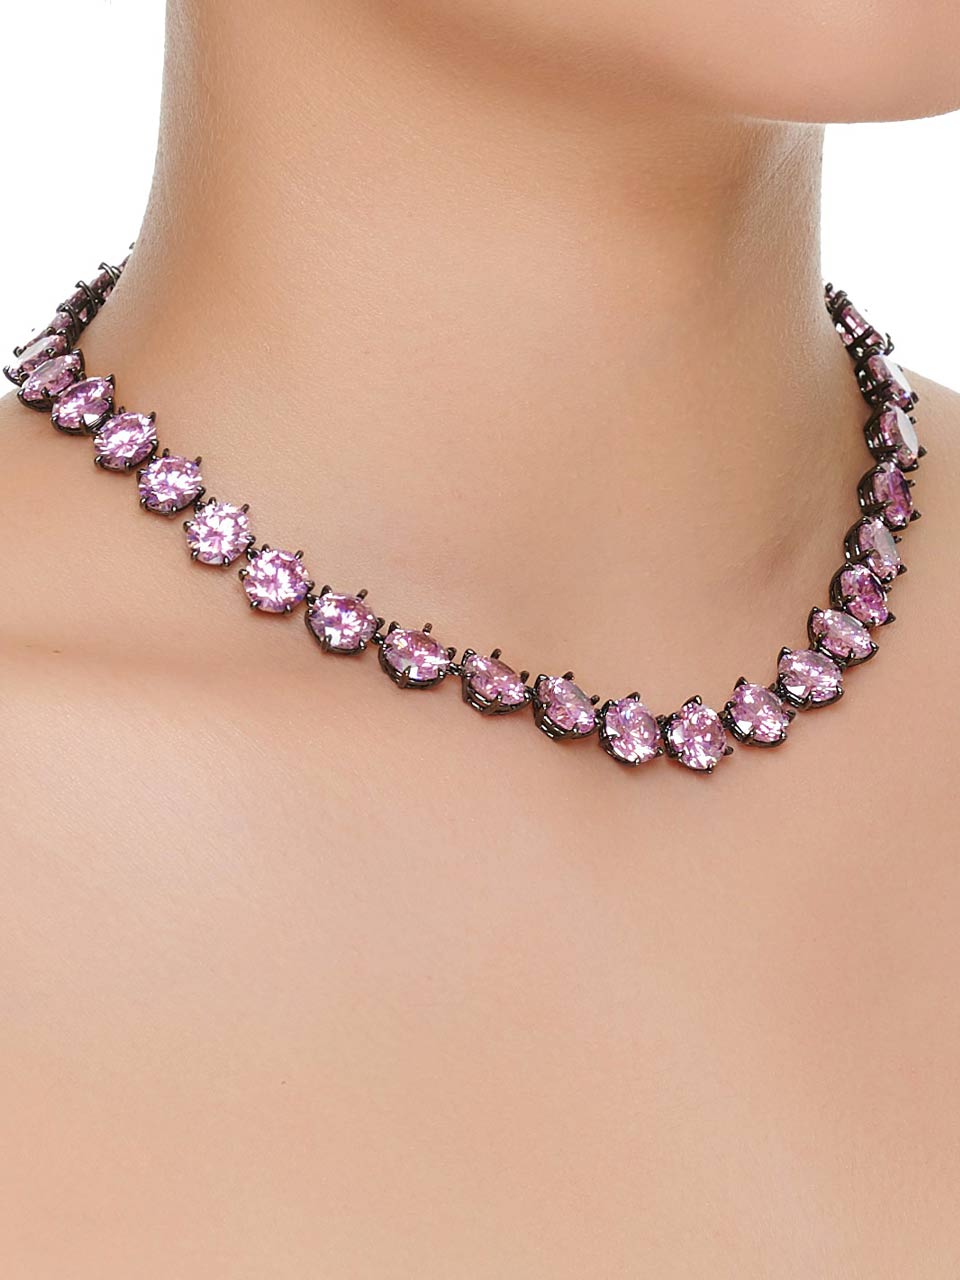 PINK UNIVERSE NECKLACE